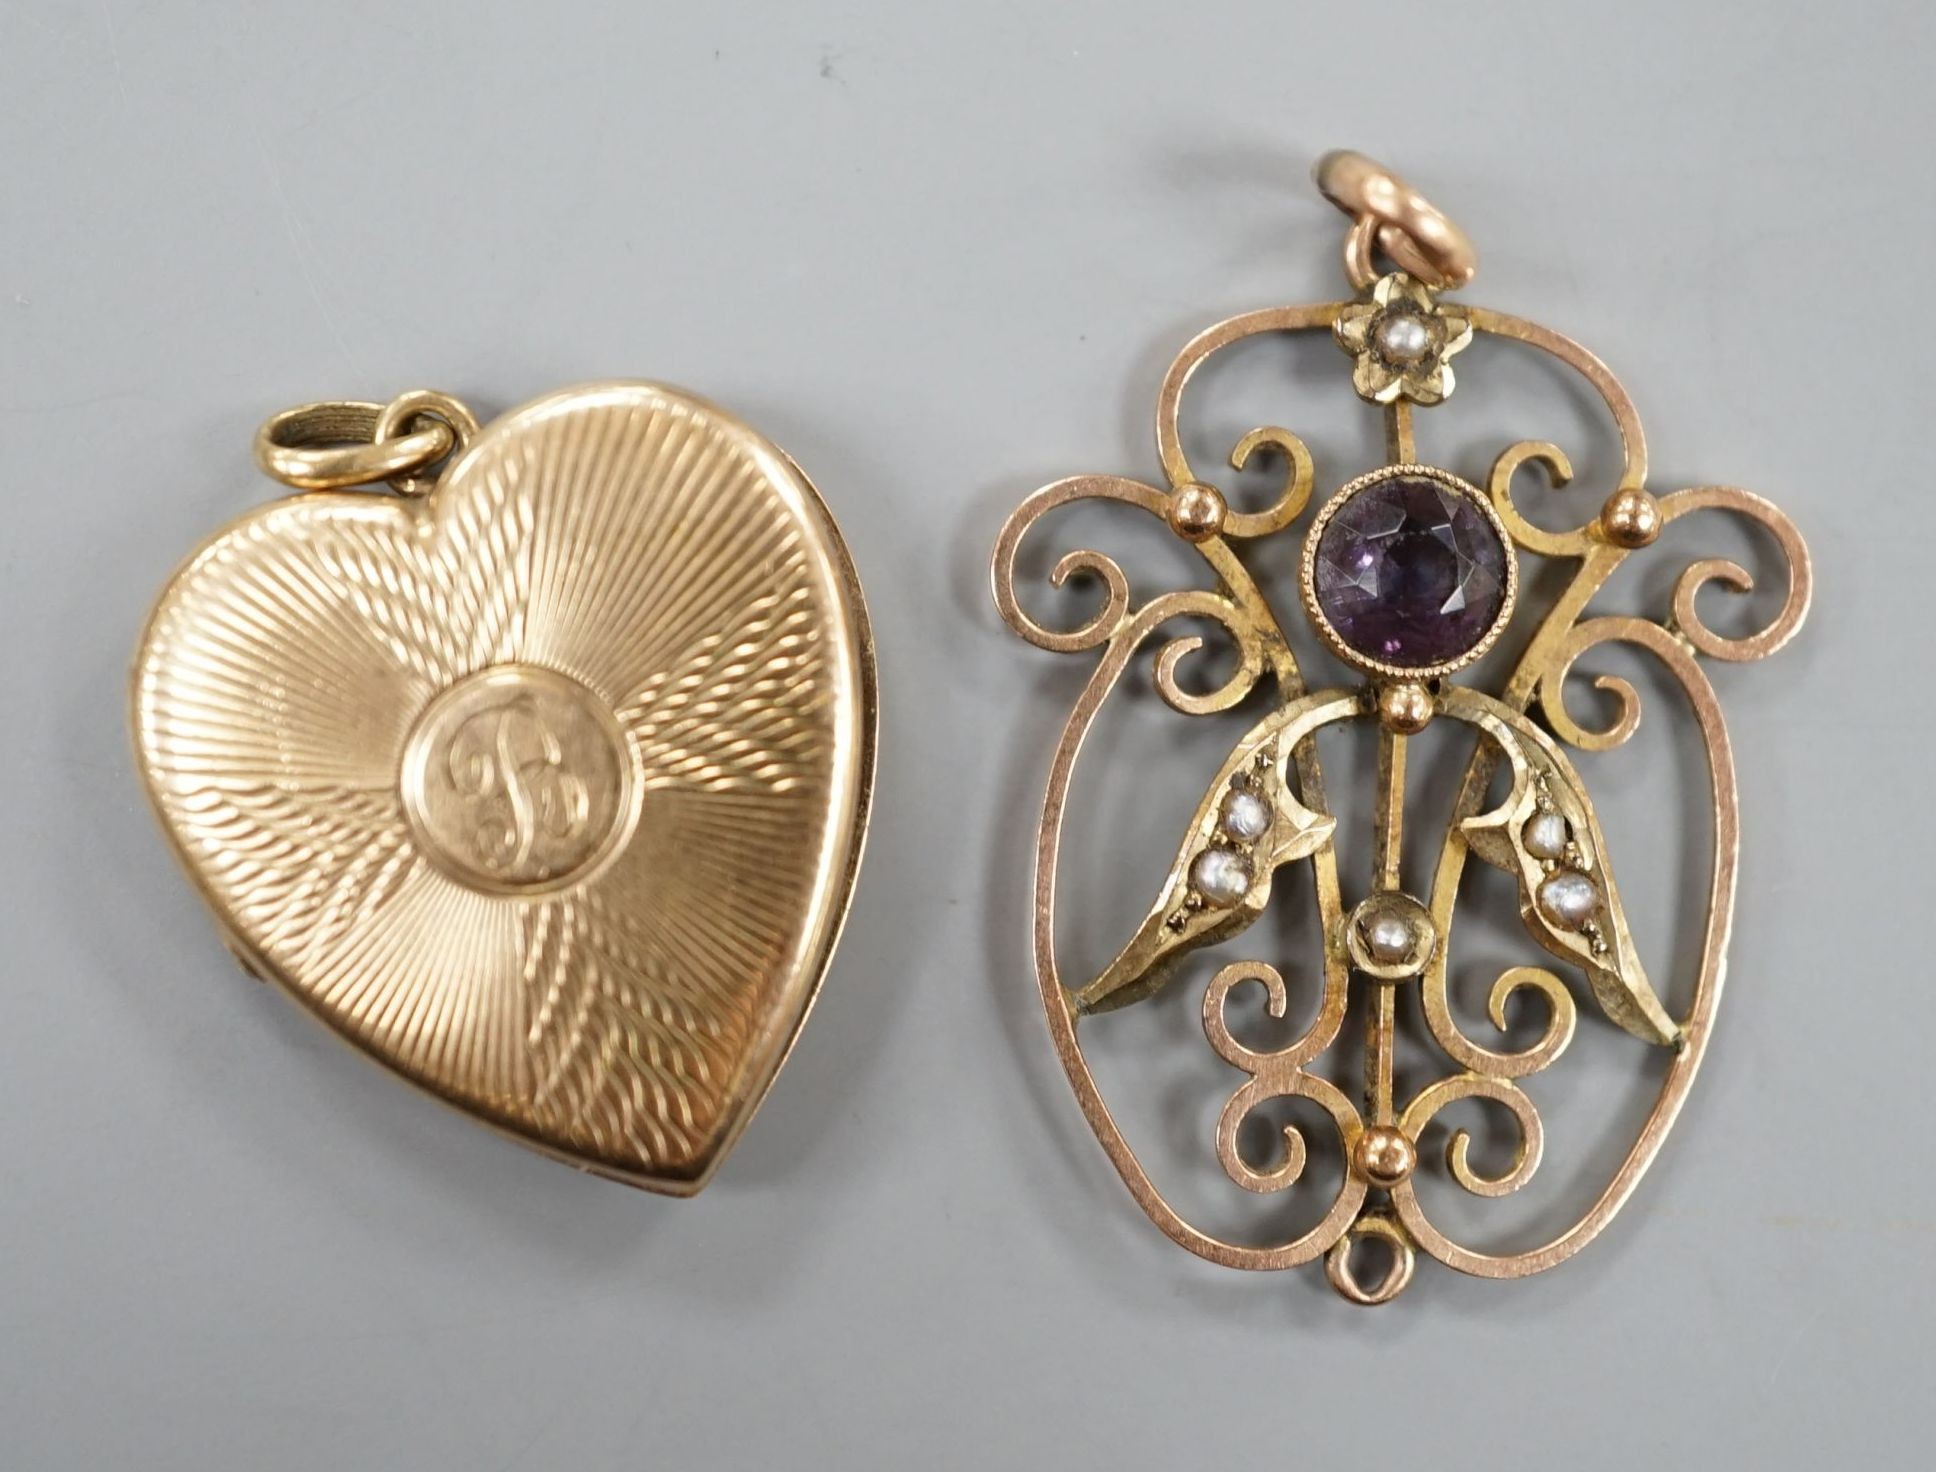 A 9ct gold heart shaped locket, with engraved inscription, 22mm and an Edwardian 9ct, amethyst and seed pearl set pendant